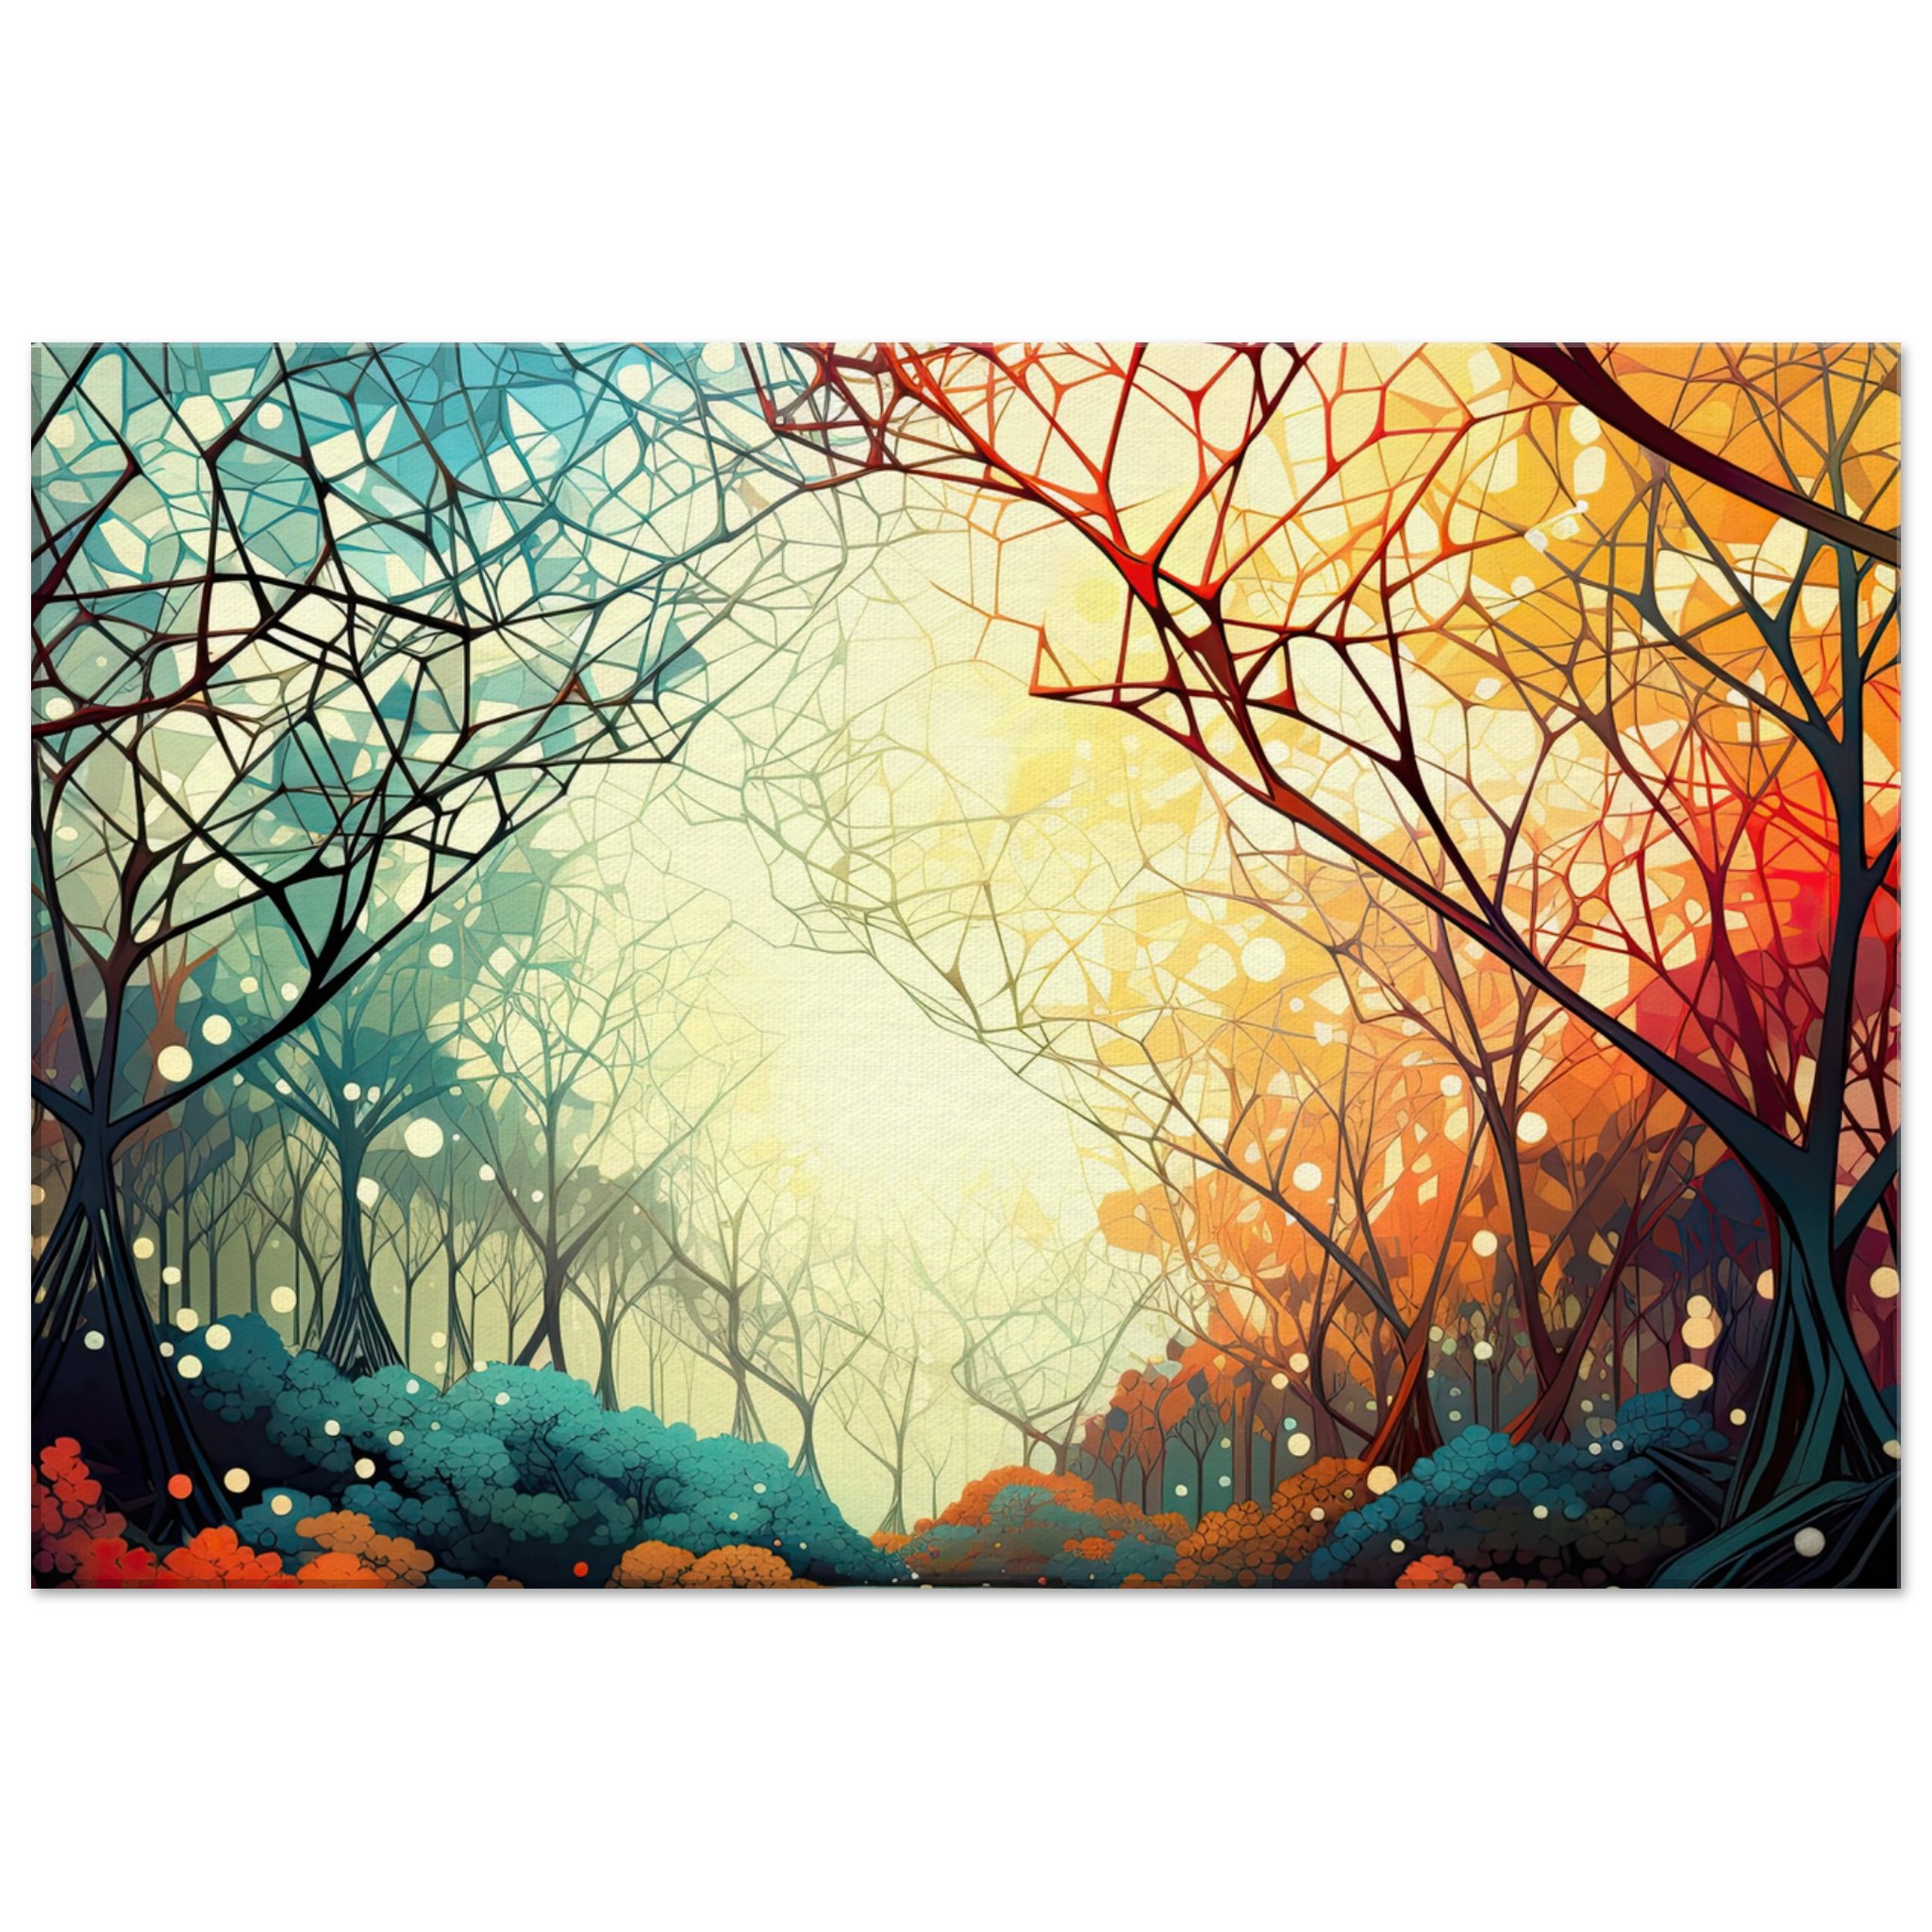 Forest Colorful Abstract Landscape Canvas Print – 50×75 cm / 20×30″, Thick